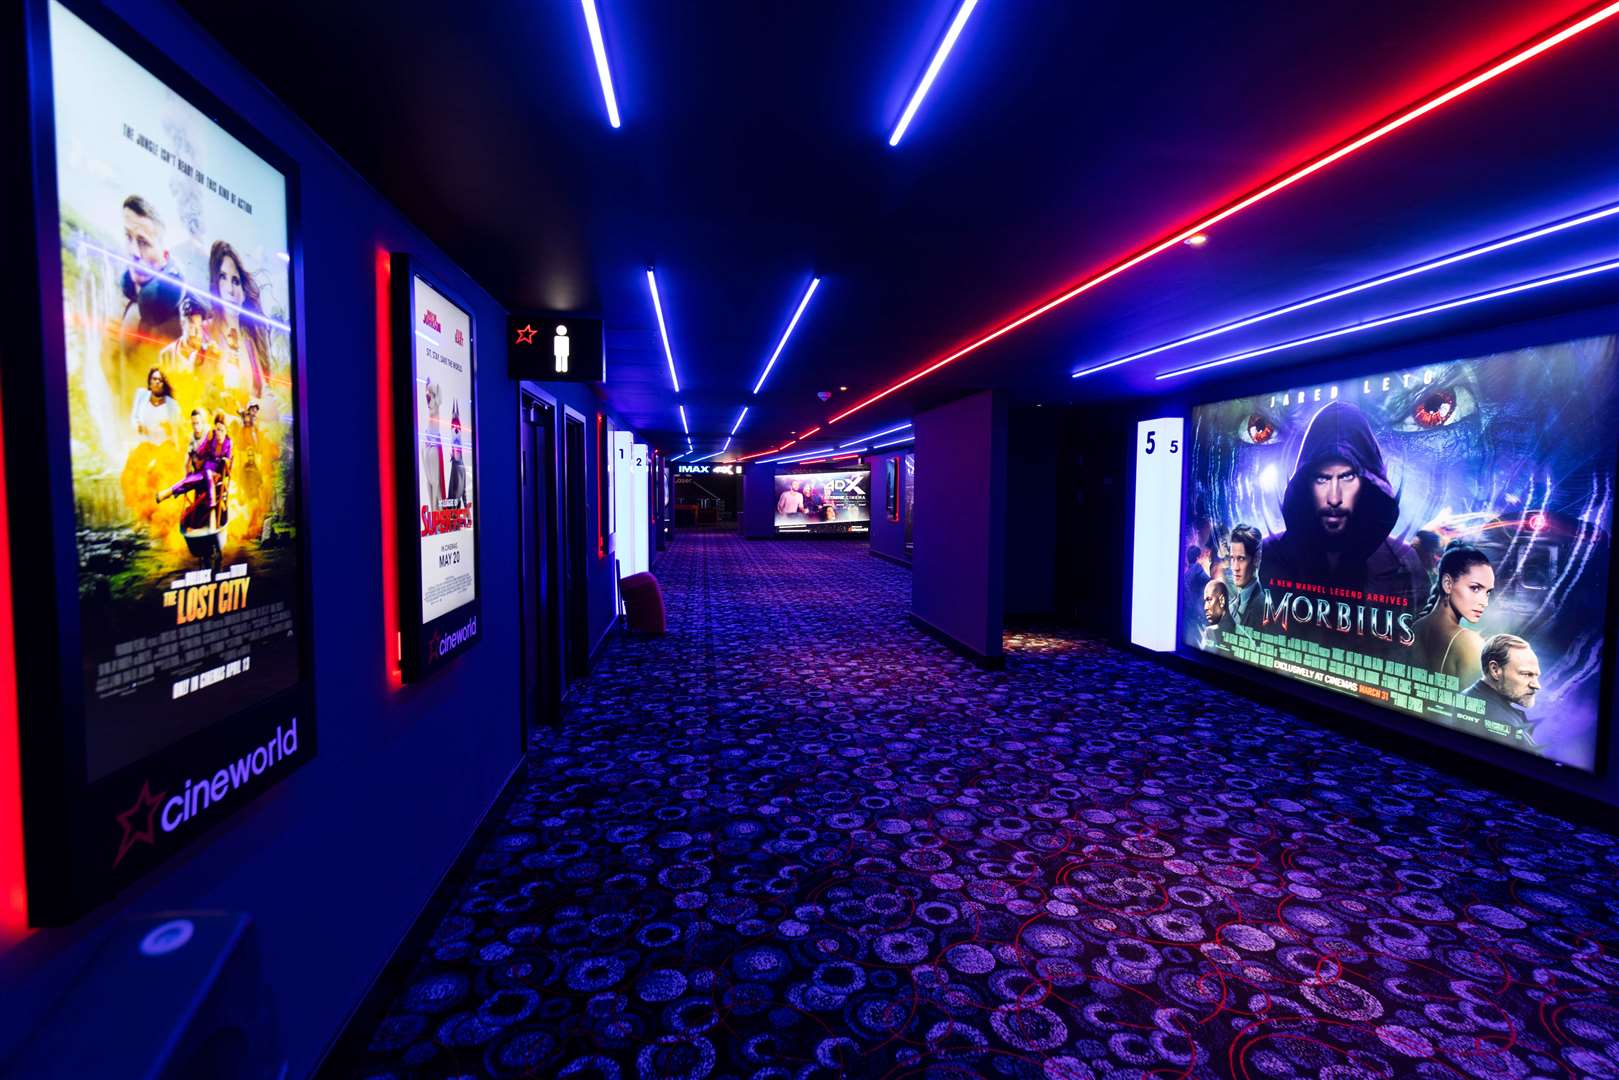 The cinema's expansion is now complete. Picture: Andrew Fosker / PinPep